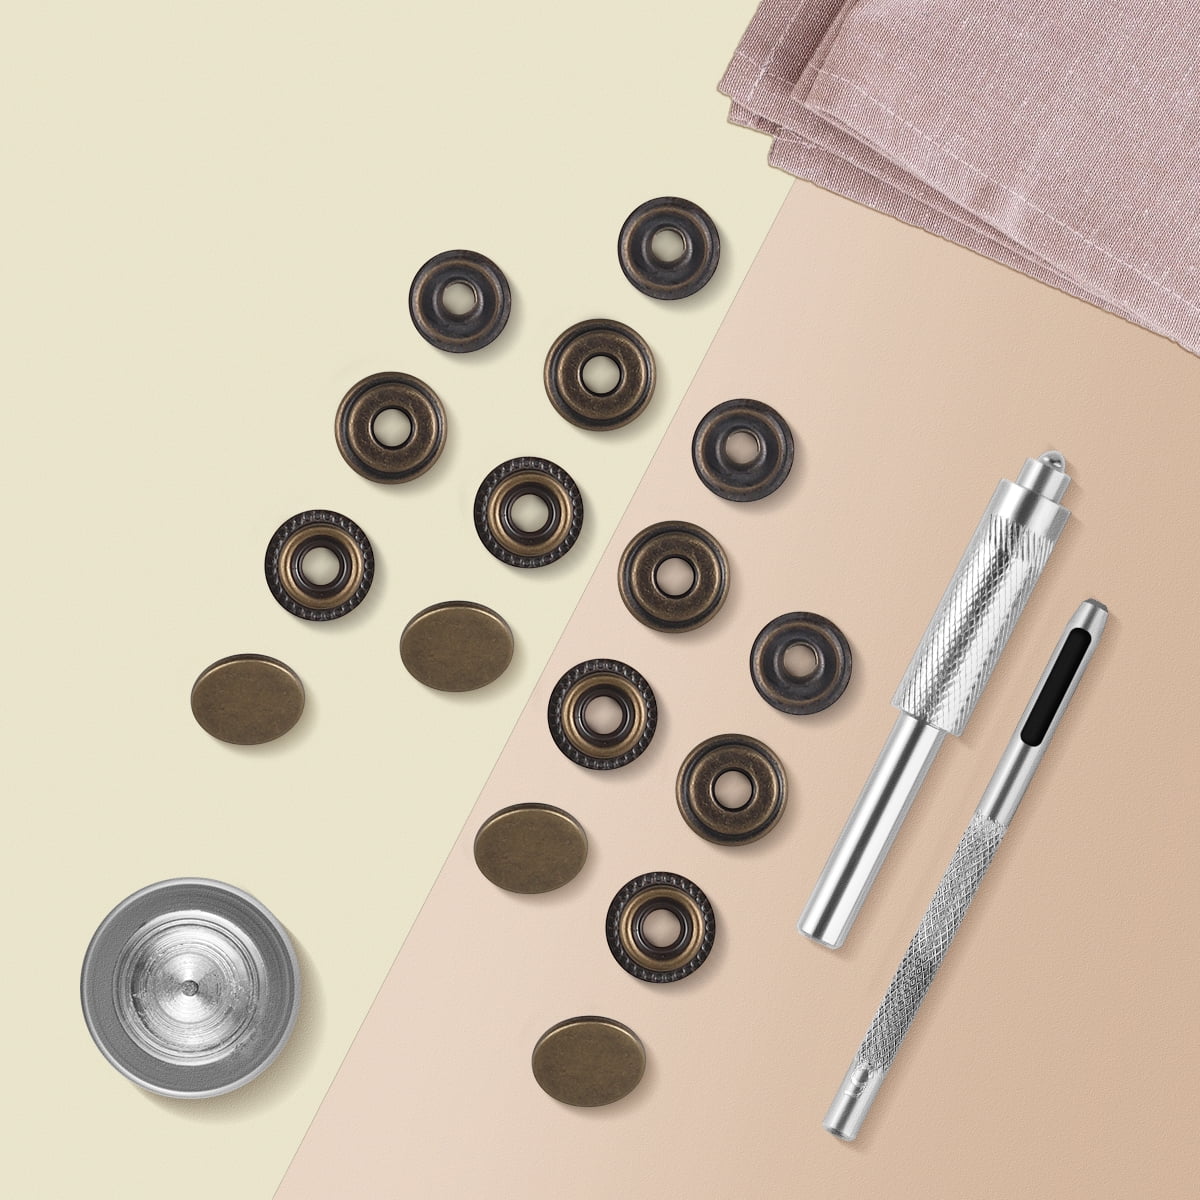 MSDADA 32 Sets Press Studs Cap Button, Stainless Steel Snap Fasteners Kit with Hand Fixing Tools, Instant Metal Buttons No-Sew Clips Snap for Bags, Jeans